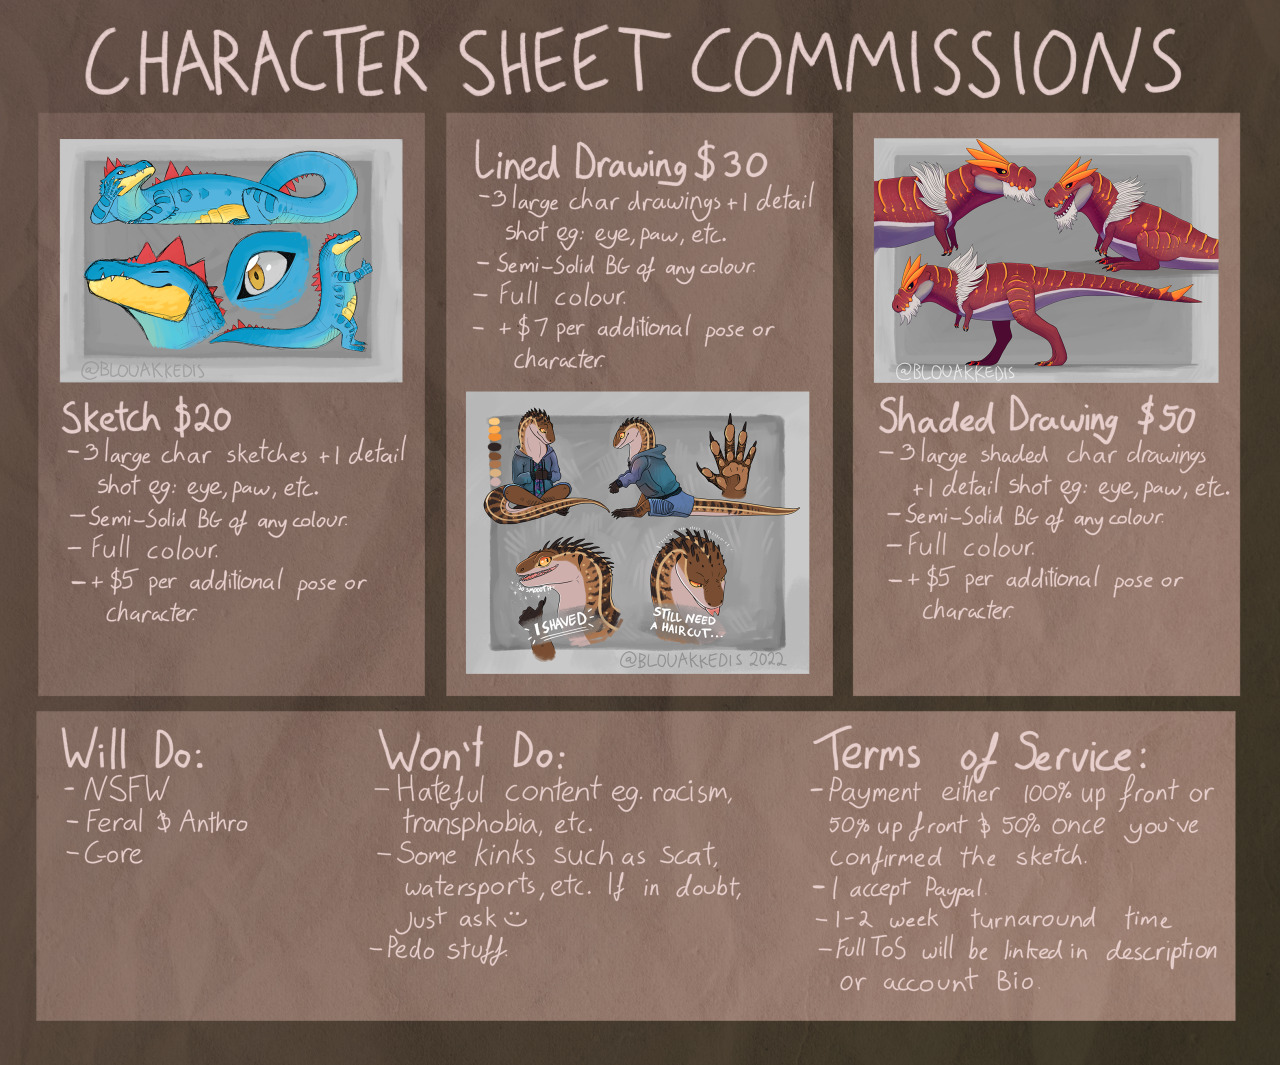 Hello there! Ive decided to open up character sheet commissions.
Please contact me either by dm or send me an email at blouakkedisart@gmail.com if you are interested or have any questions. All prices are in USD.Here are my ToS3/3 Slots open #commission#taking commisions#Furry Fandom#Furry Art#scalie#open commissions #maybe with some luck this can help support me and my beautiful snake  #im super excited and a bit nervous  #hopefully itll go okay :)  #oh and please lmk if any links are broken